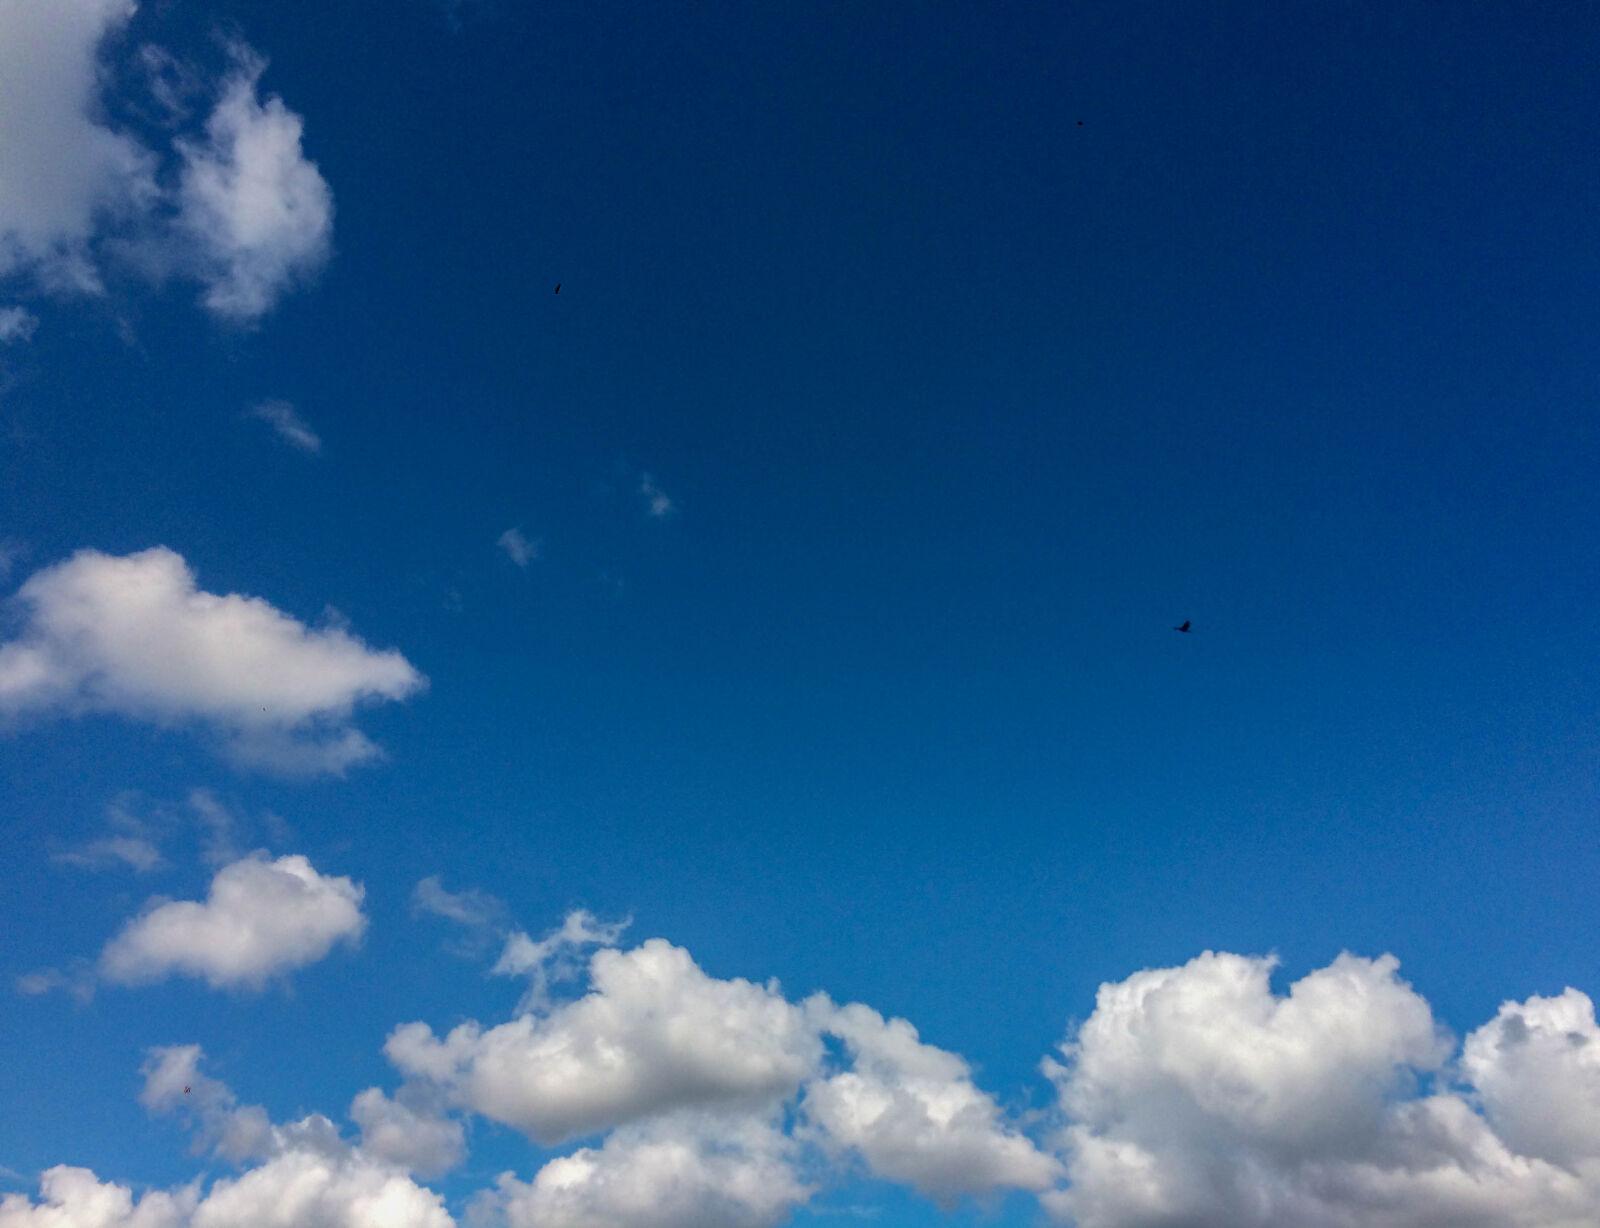 Apple iPhone 5s sample photo. Blue, blue, sky, clouds photography